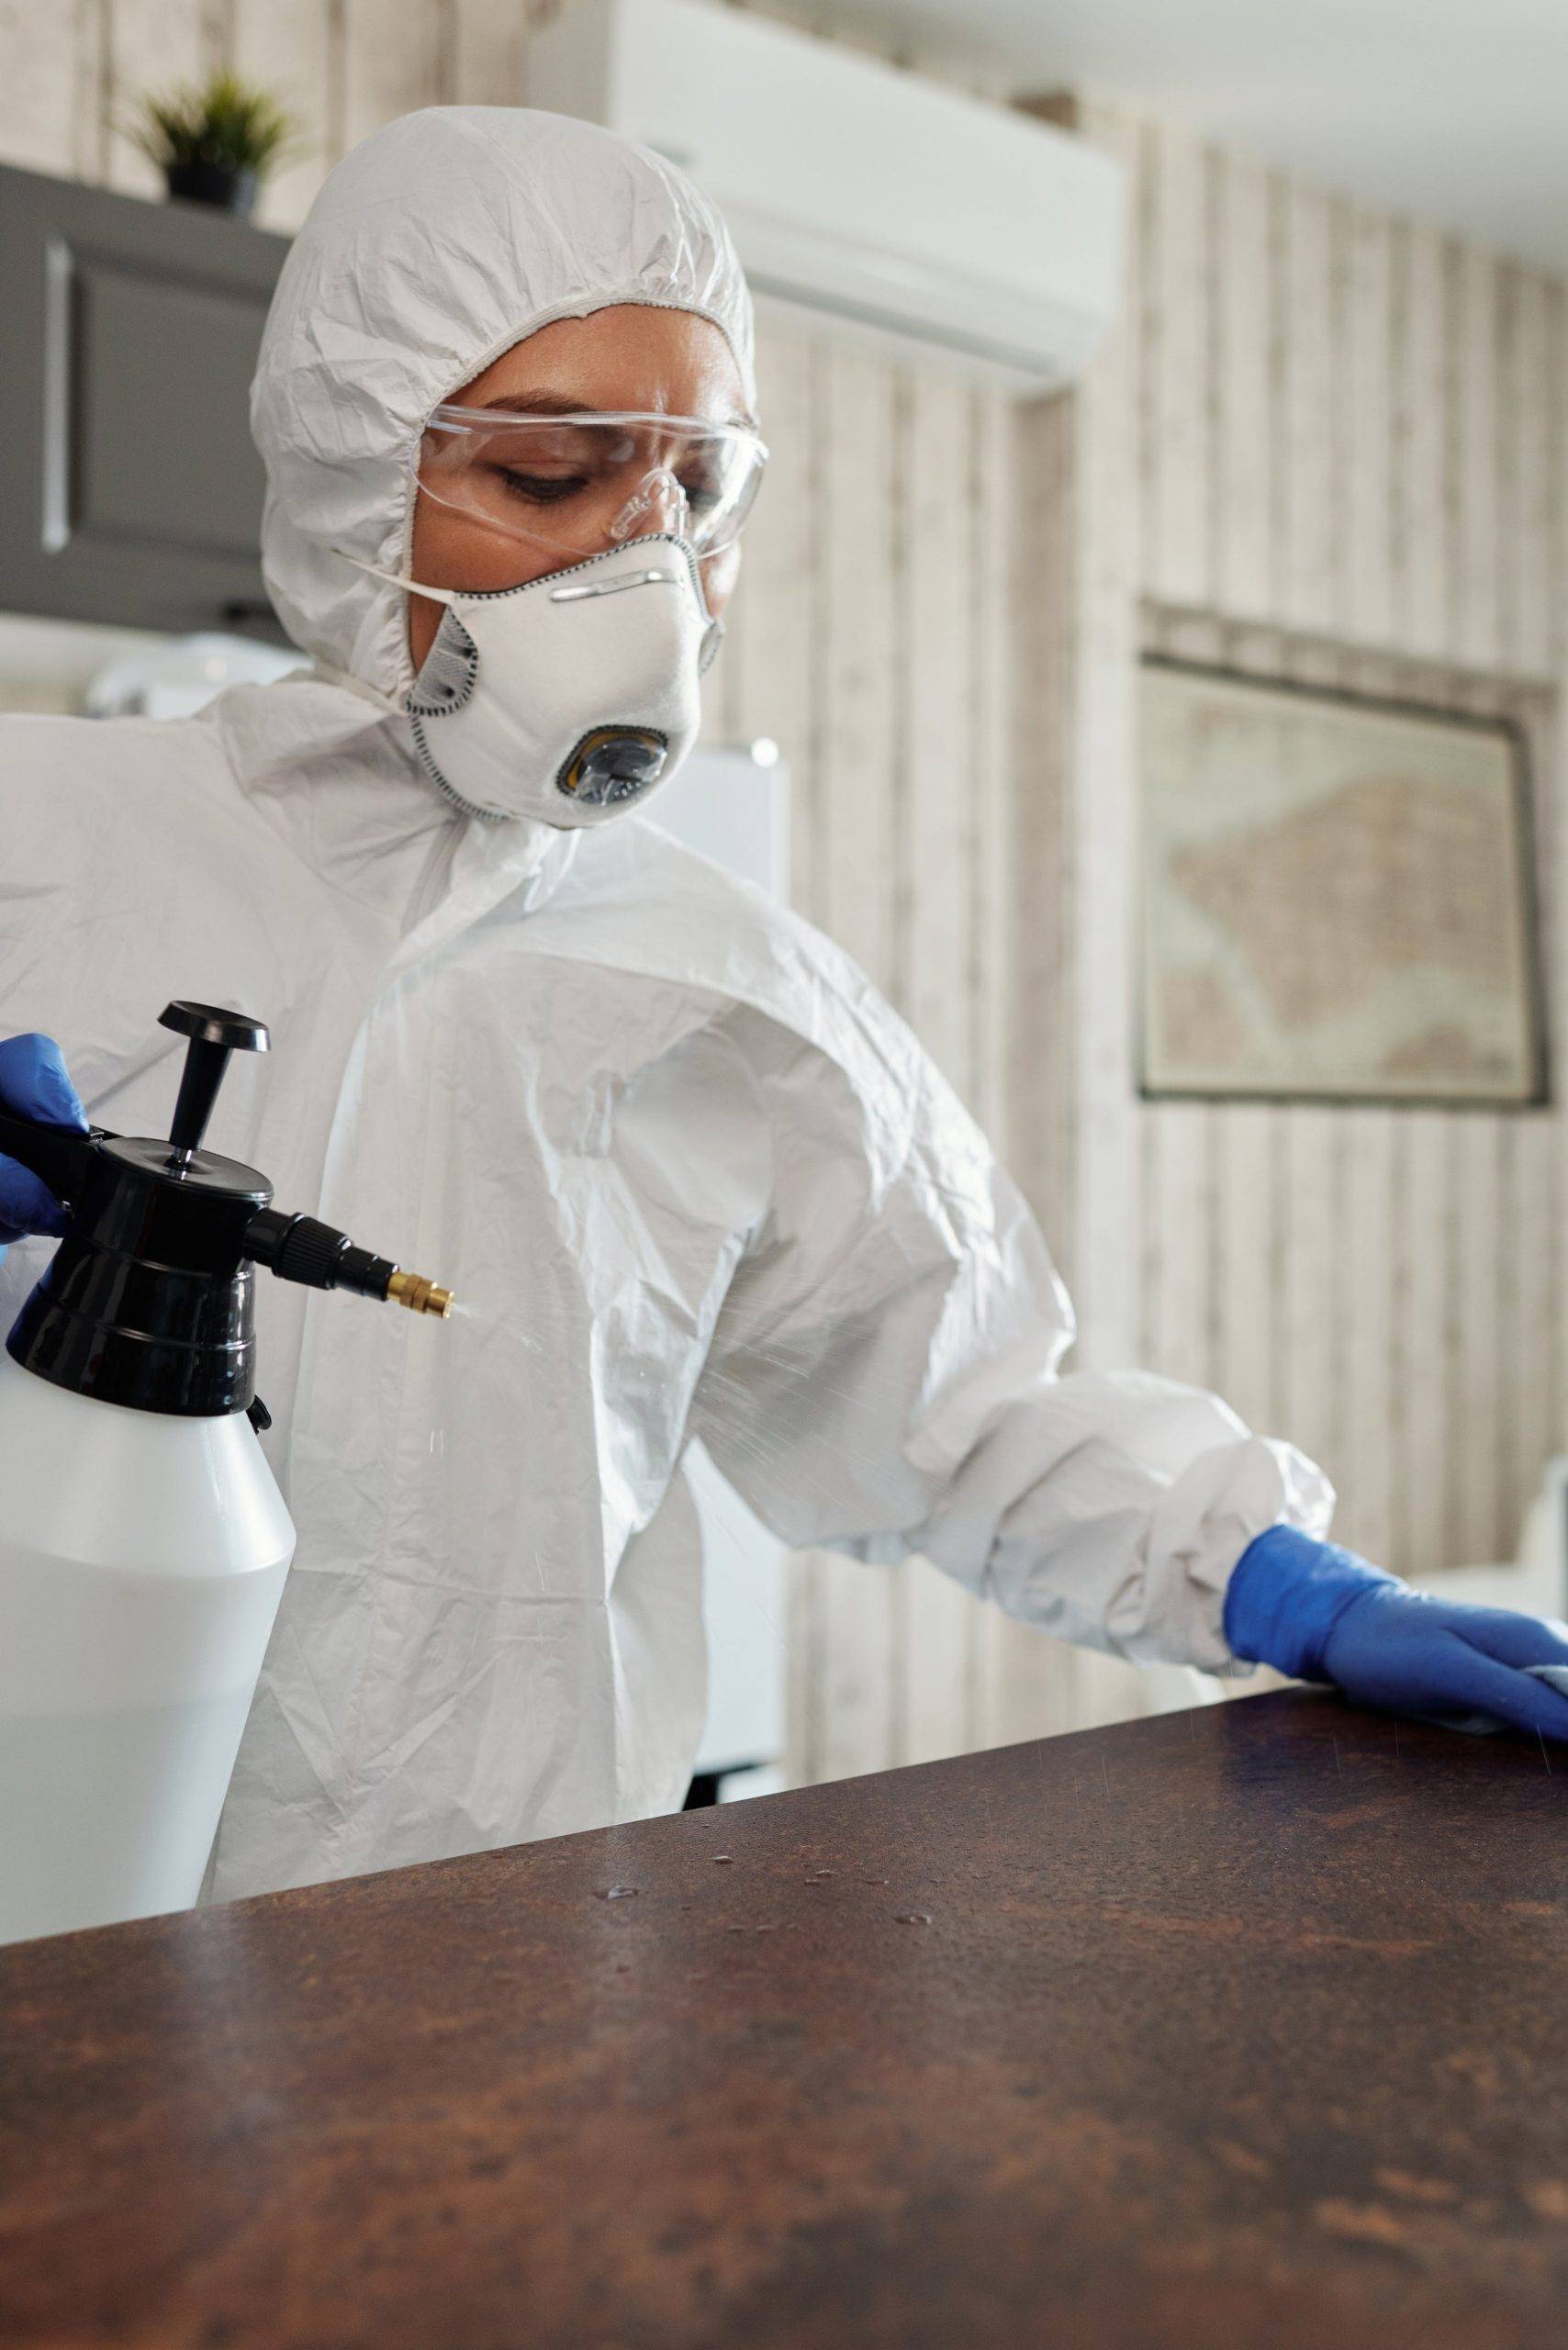 Health in a Bottle: Examining the Ingredients of Safe Spray's EPA-Registered Disinfectants